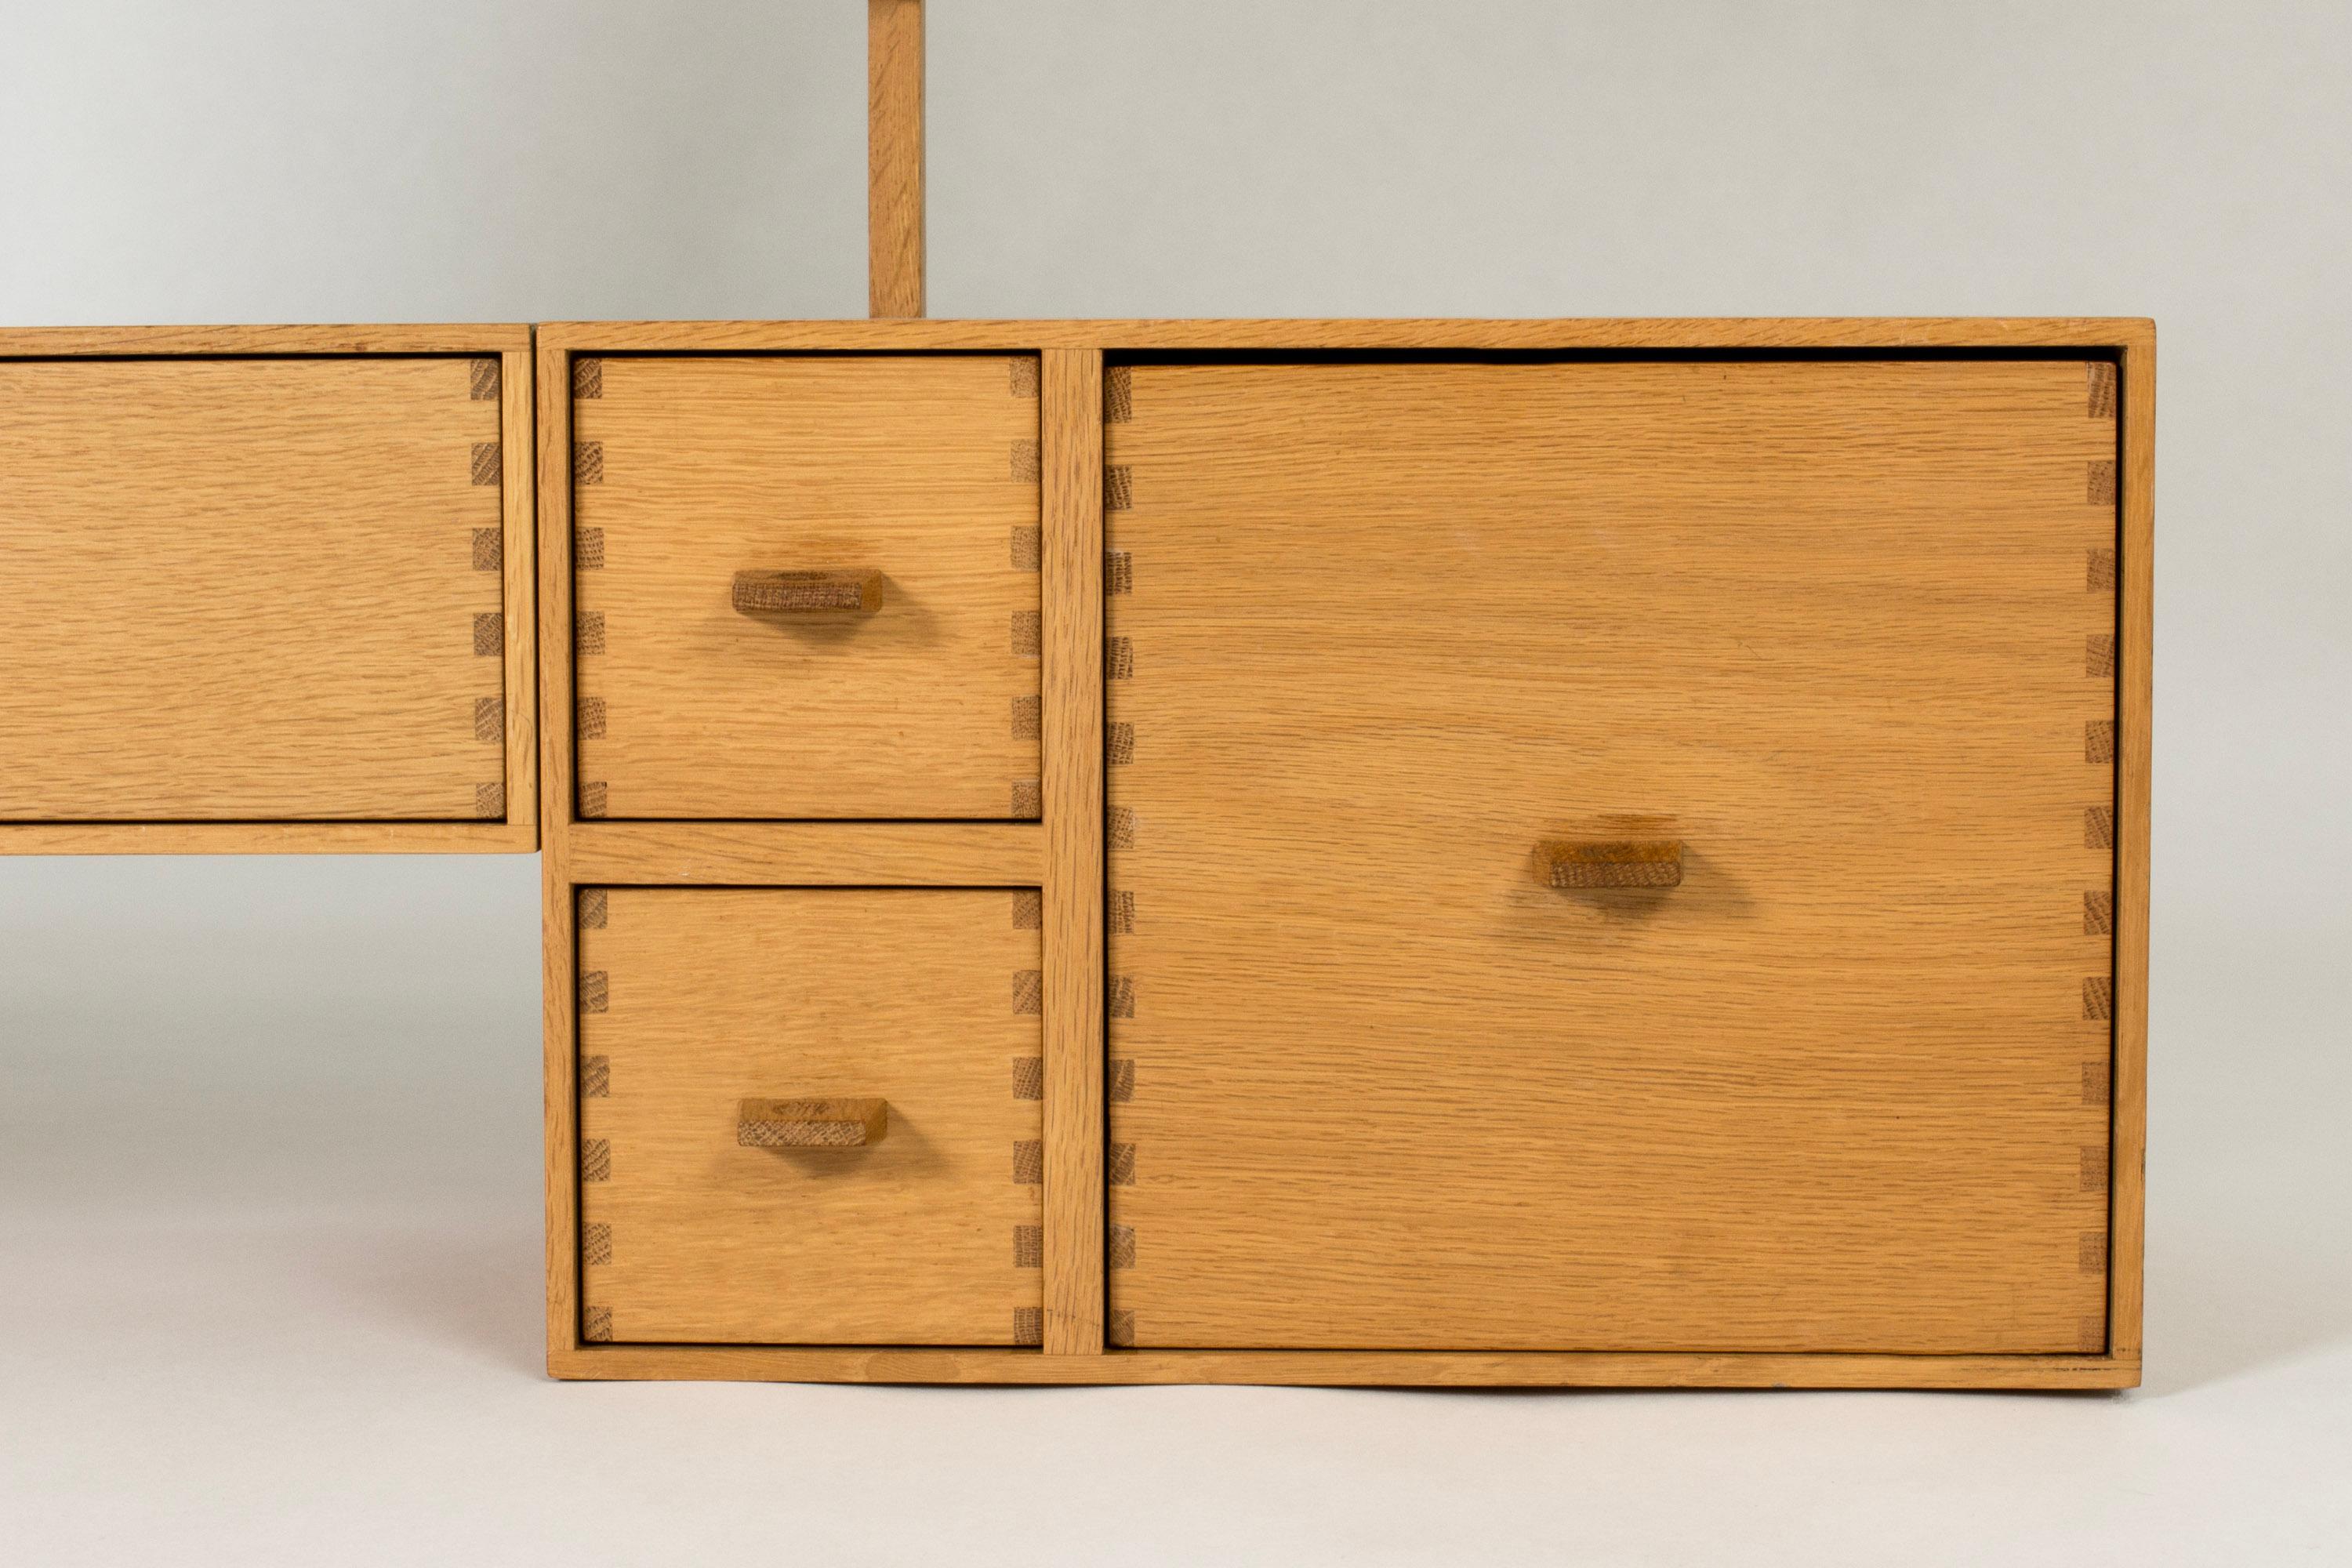 Beautiful wall dressing table by Uno and Östen Kristiansson, made from oak. Cool details in the joinery and the sculpted handles on the drawers.